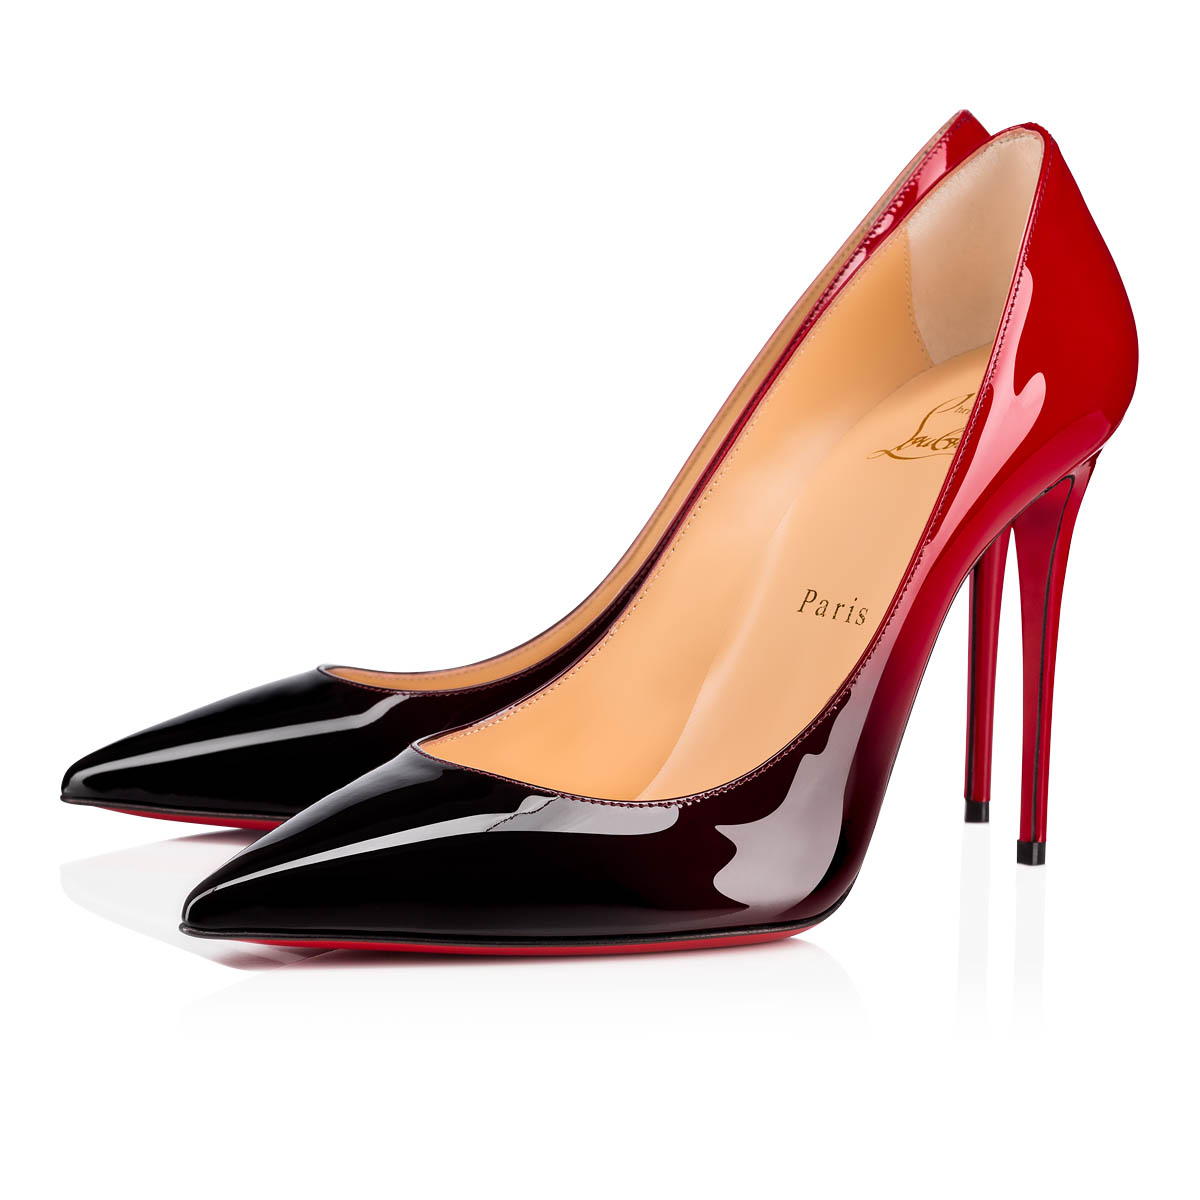 Louboutin Red Shoes, over 1,000 Louboutin Red Shoes